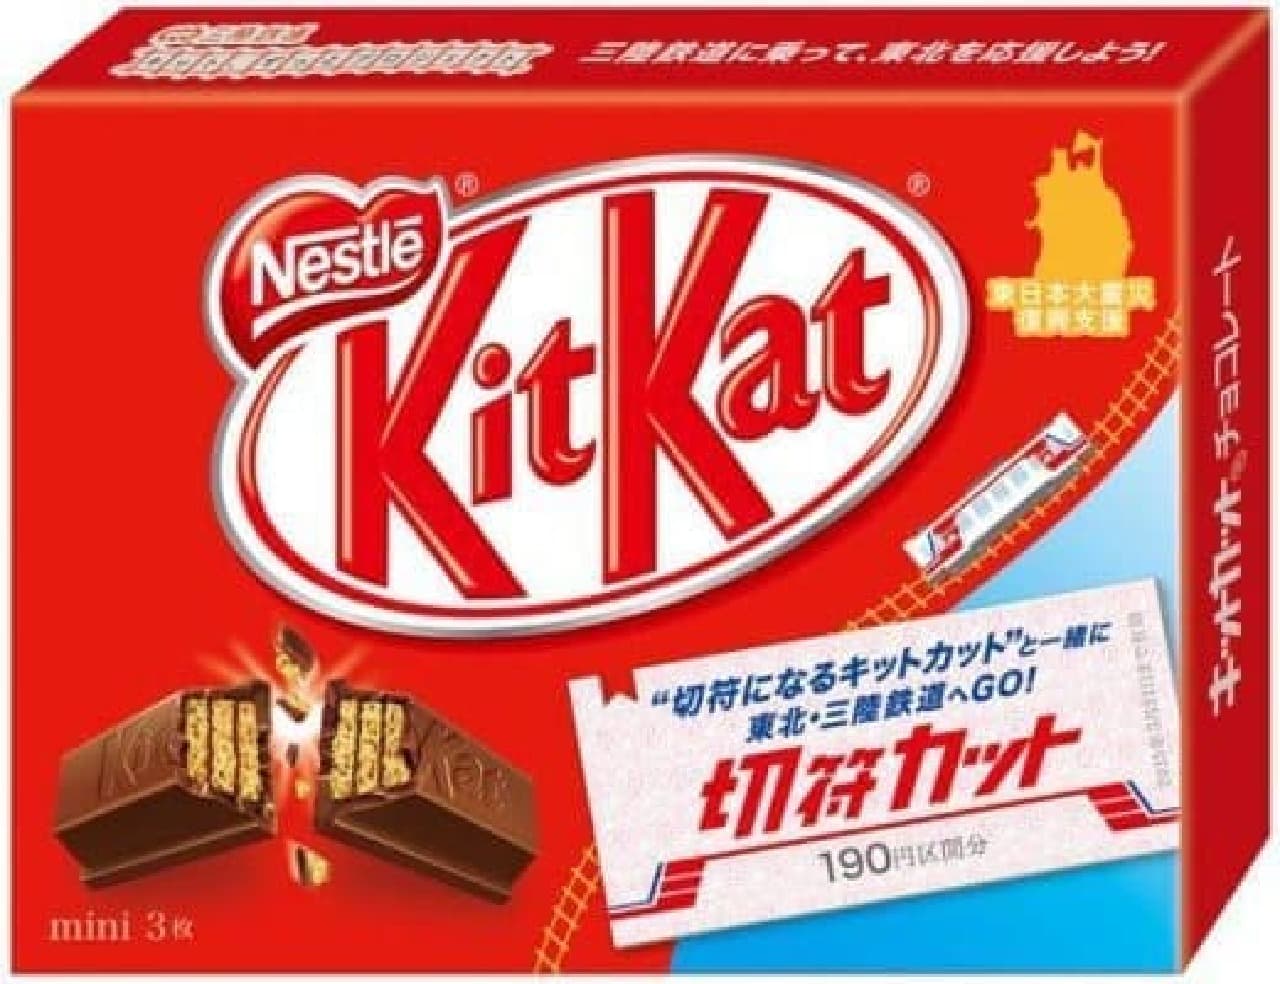 The world's first KitKat becomes a ticket!